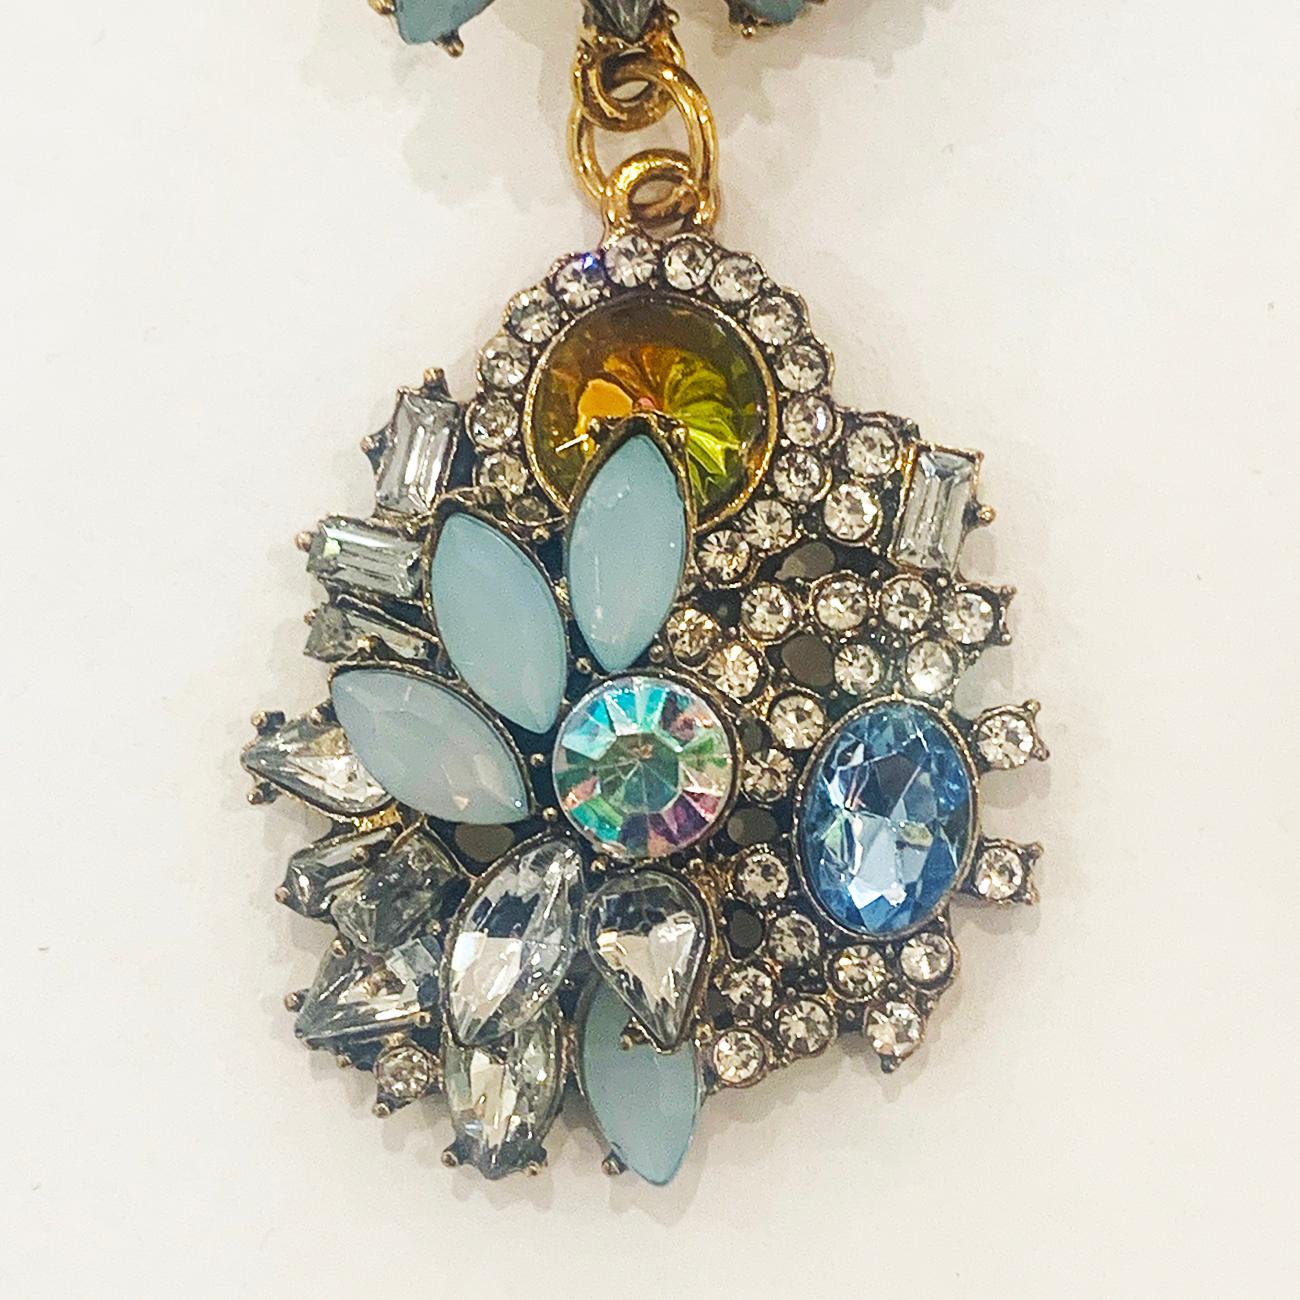 Genuine Oscar De La Renta Earrings, design “Garden Party”, in soft blue tones, and a “Rainbow” Diamante with multiple different shaped crystal diamantes, all facetted, in various shapes and many different sizes. All in excellent condition with no